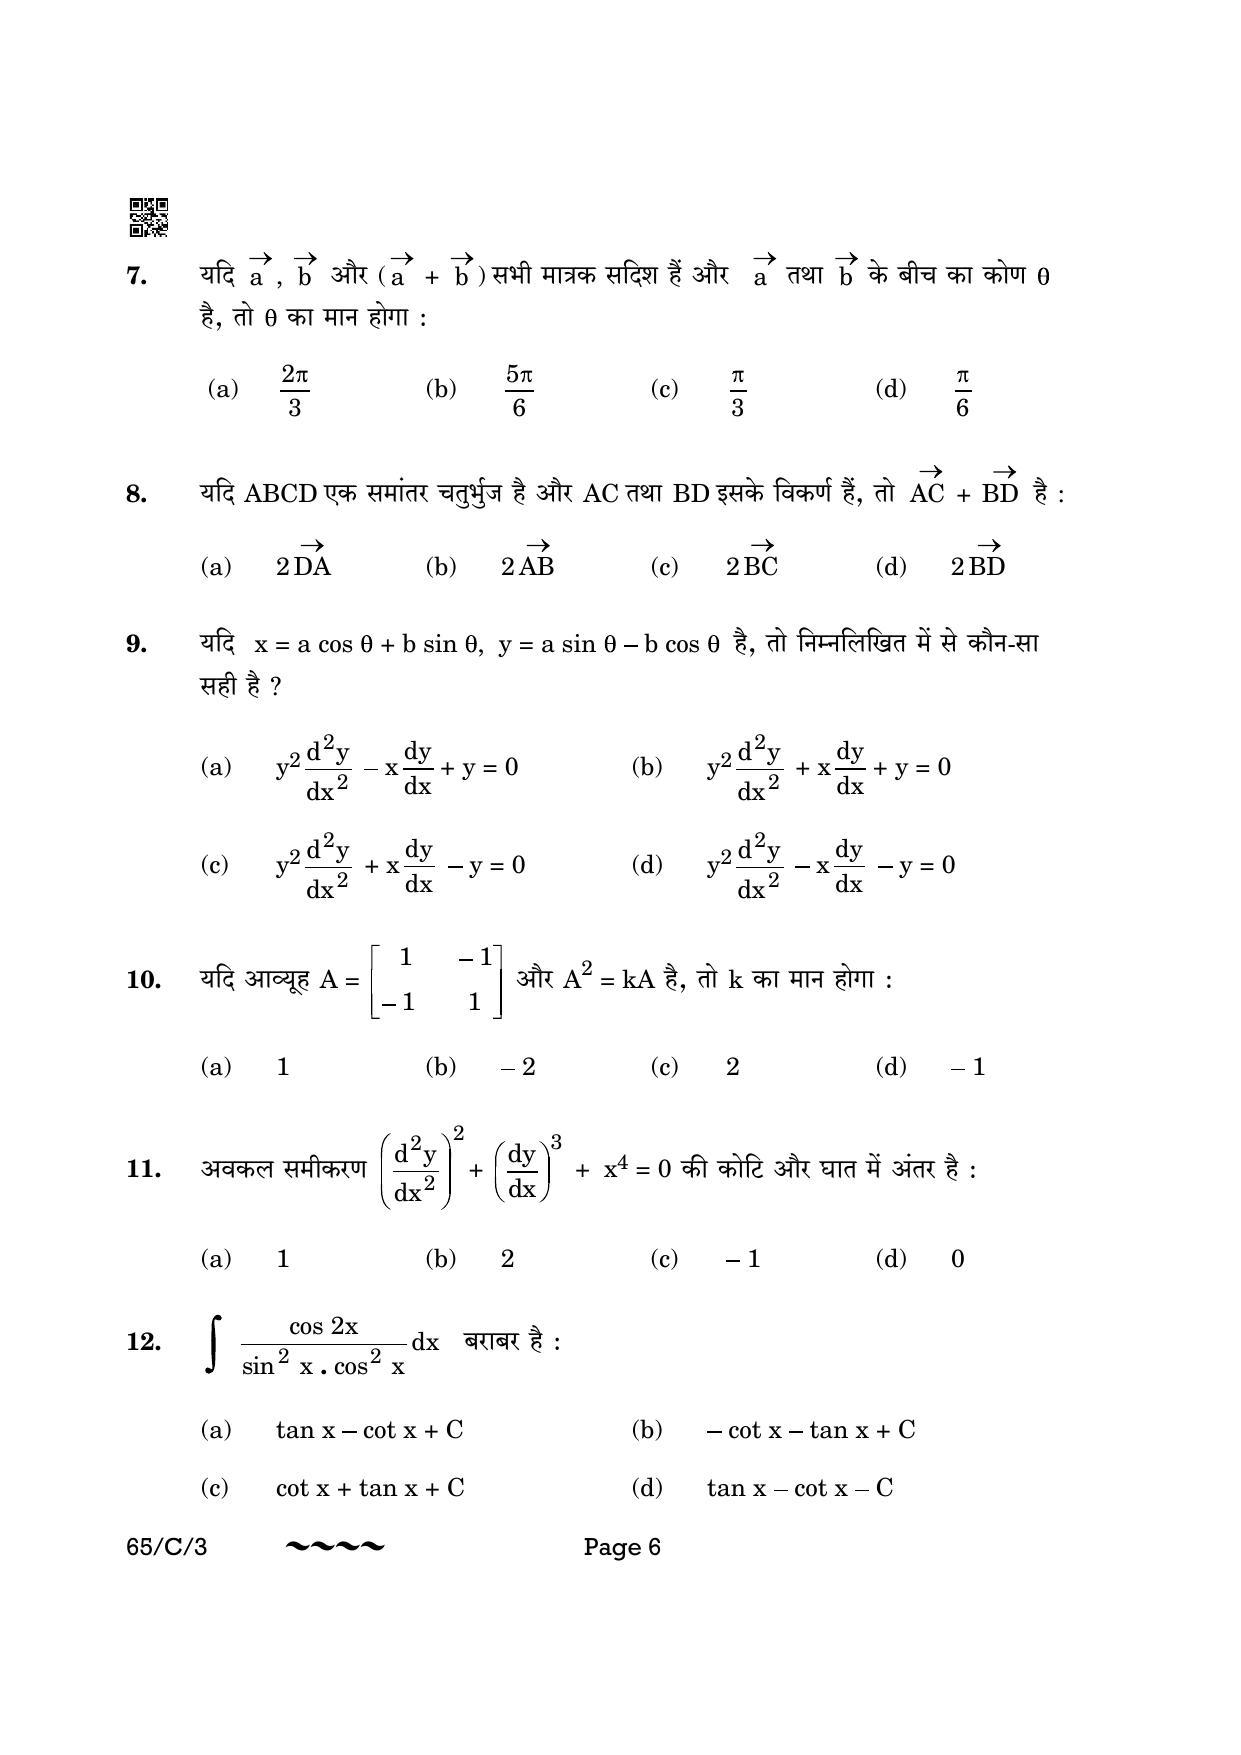 CBSE Class 12 65-3- Mathematics 2023 (Compartment) Question Paper - Page 6